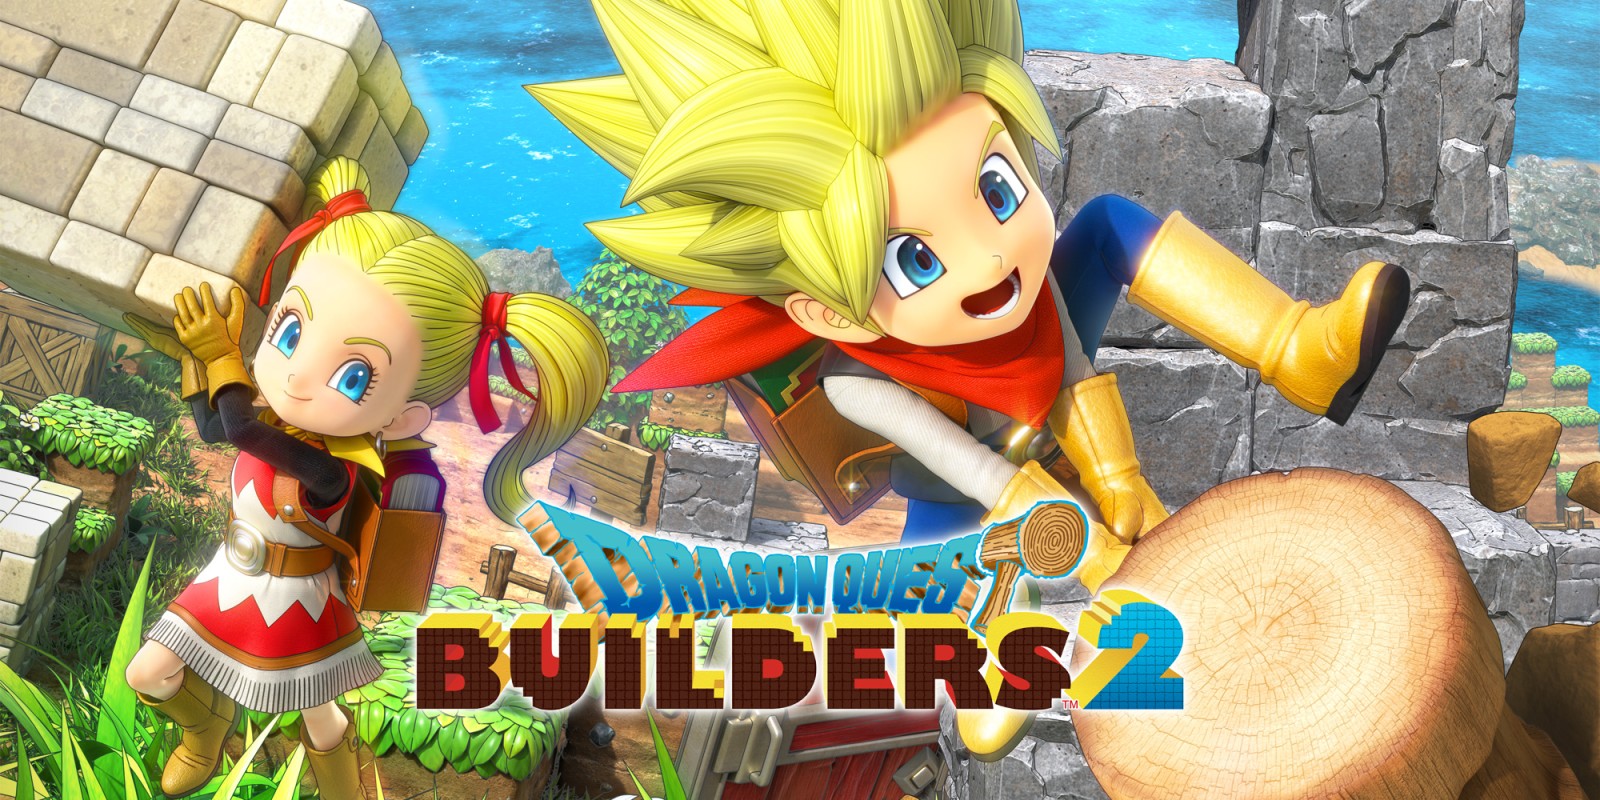 https://cdn03.nintendo-europe.com/media/images/10_share_images/games_15/nintendo_switch_4/H2x1_NSwitch_DragonQuestBuilders2_image1600w.jpg